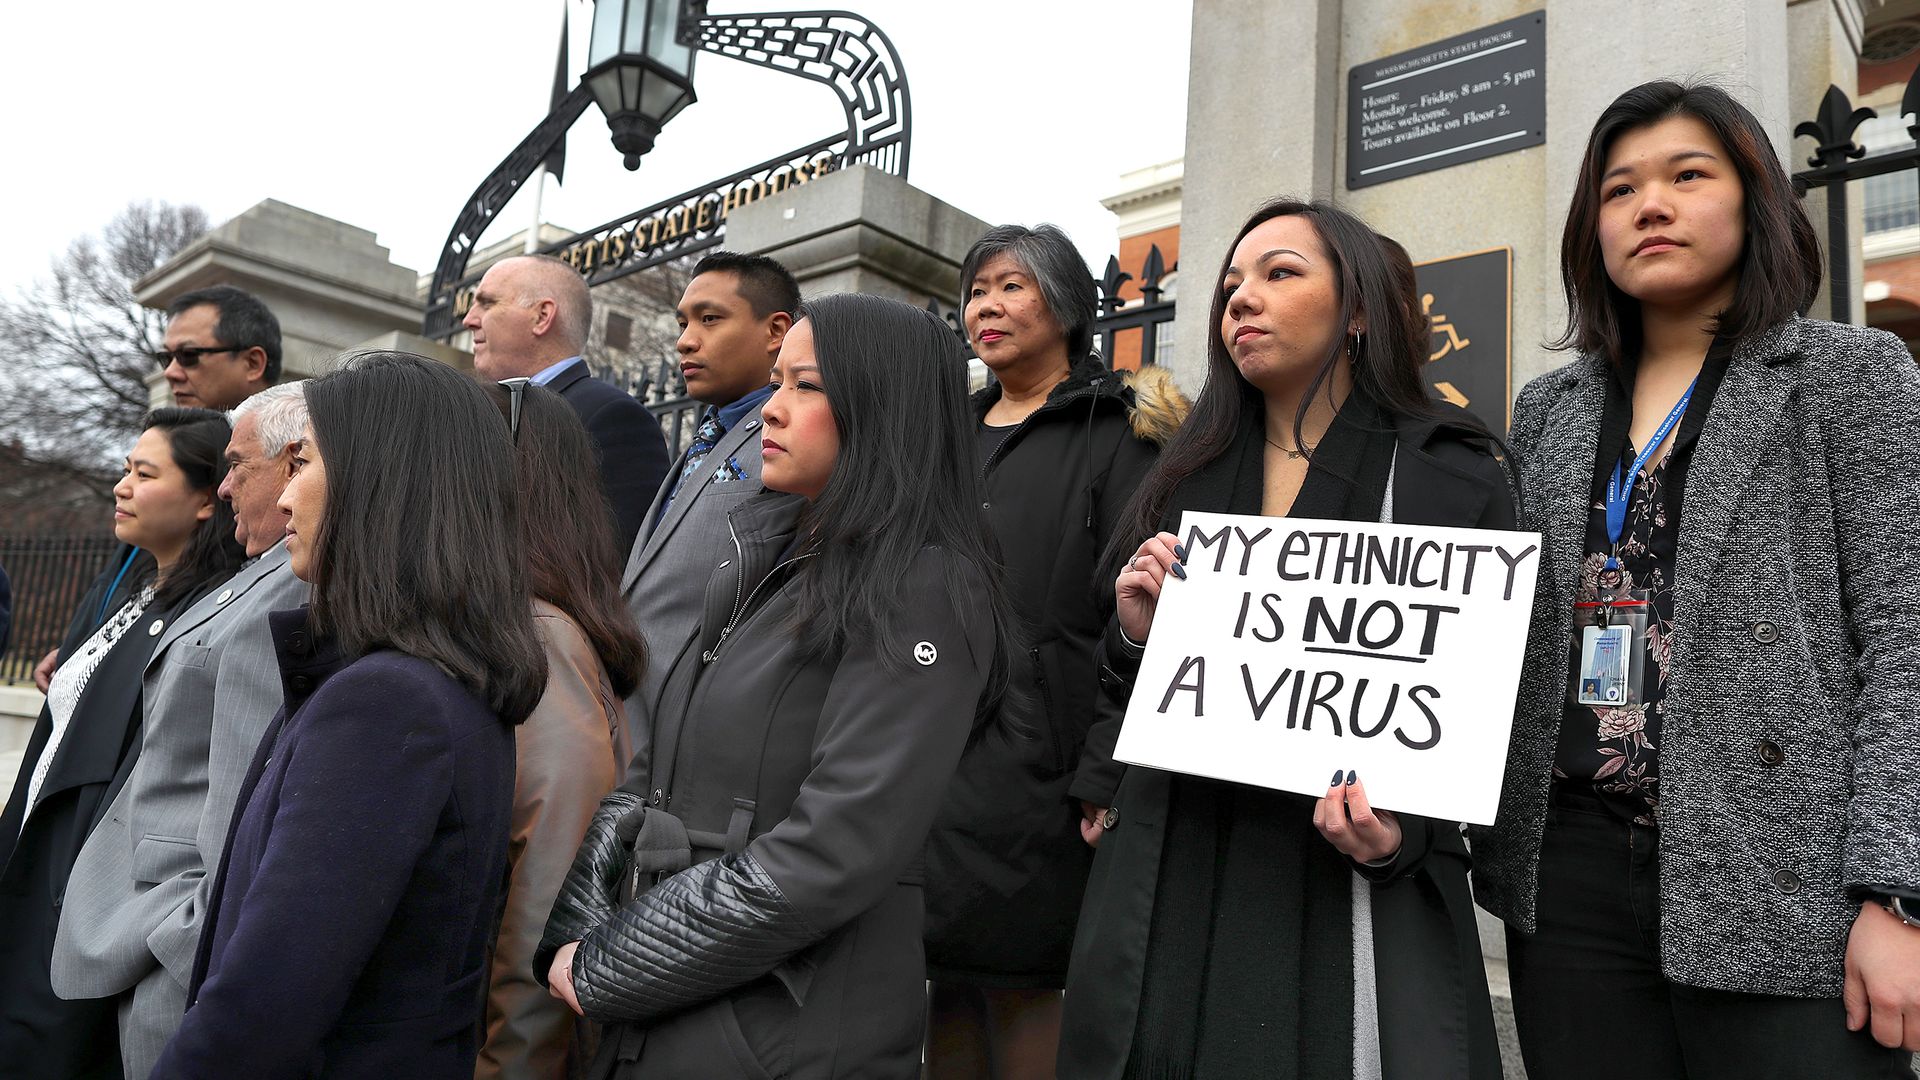 Members of the Asian American Commission hold a press conference in Boston as one woman holds a sign that says "My ethnicity is not a virus."